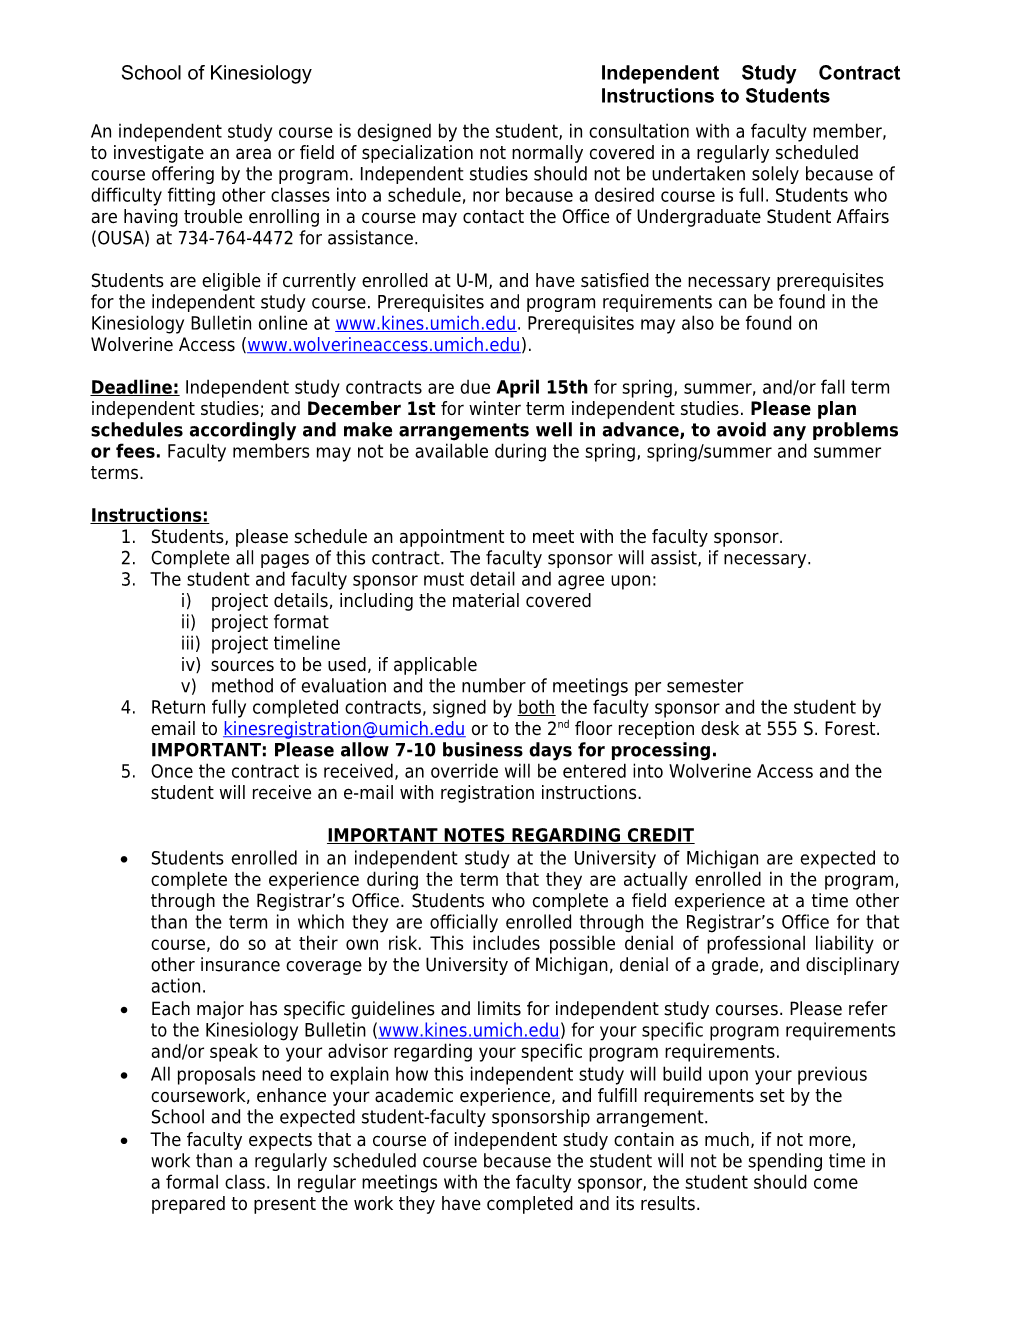 School of Kinesiology Independentstudy Contract Instructions to Students